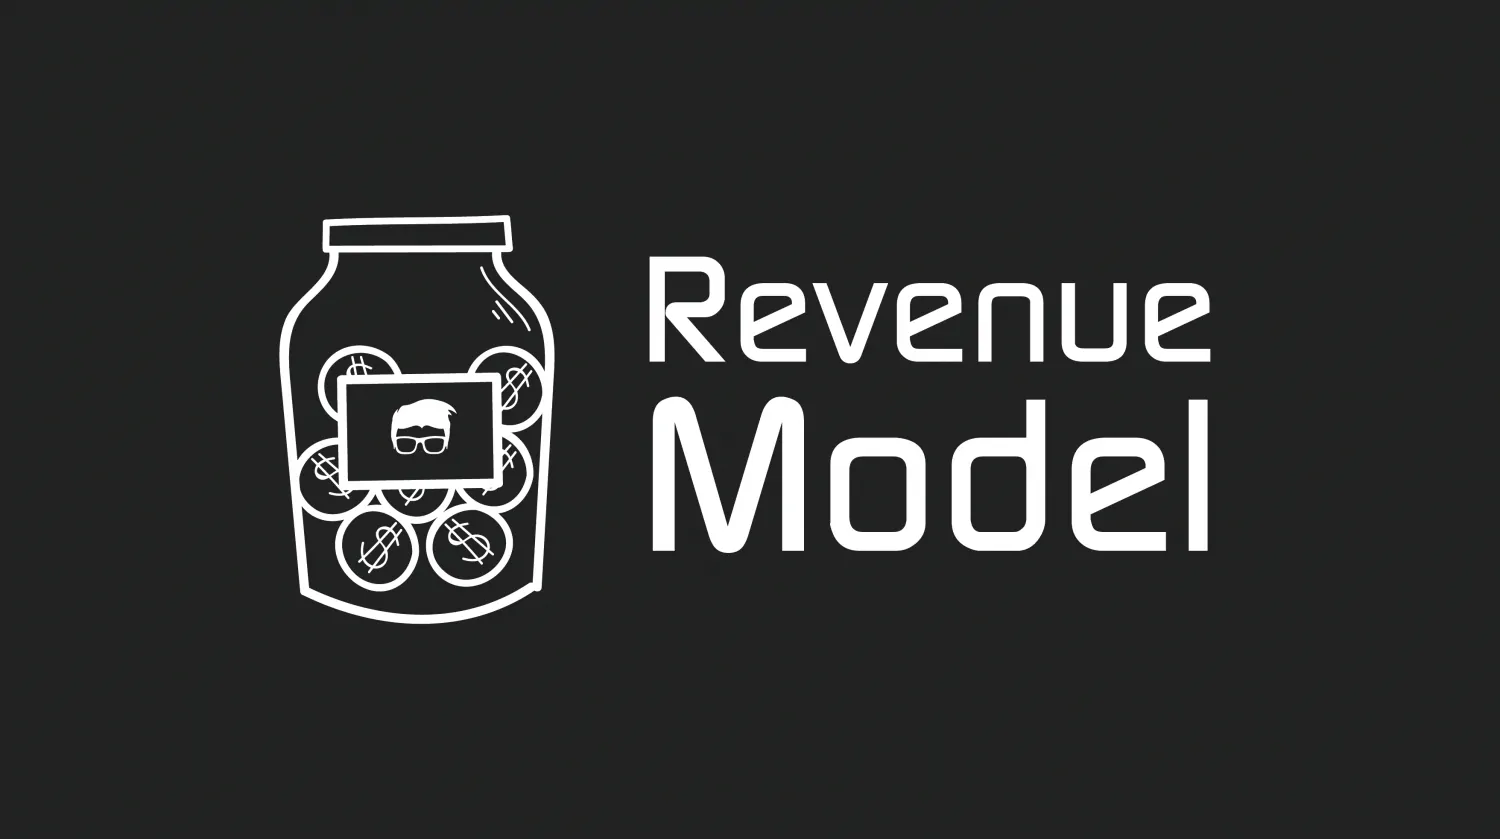 What is A Revenue Stream? - Definition, Types, & Examples – Feedough